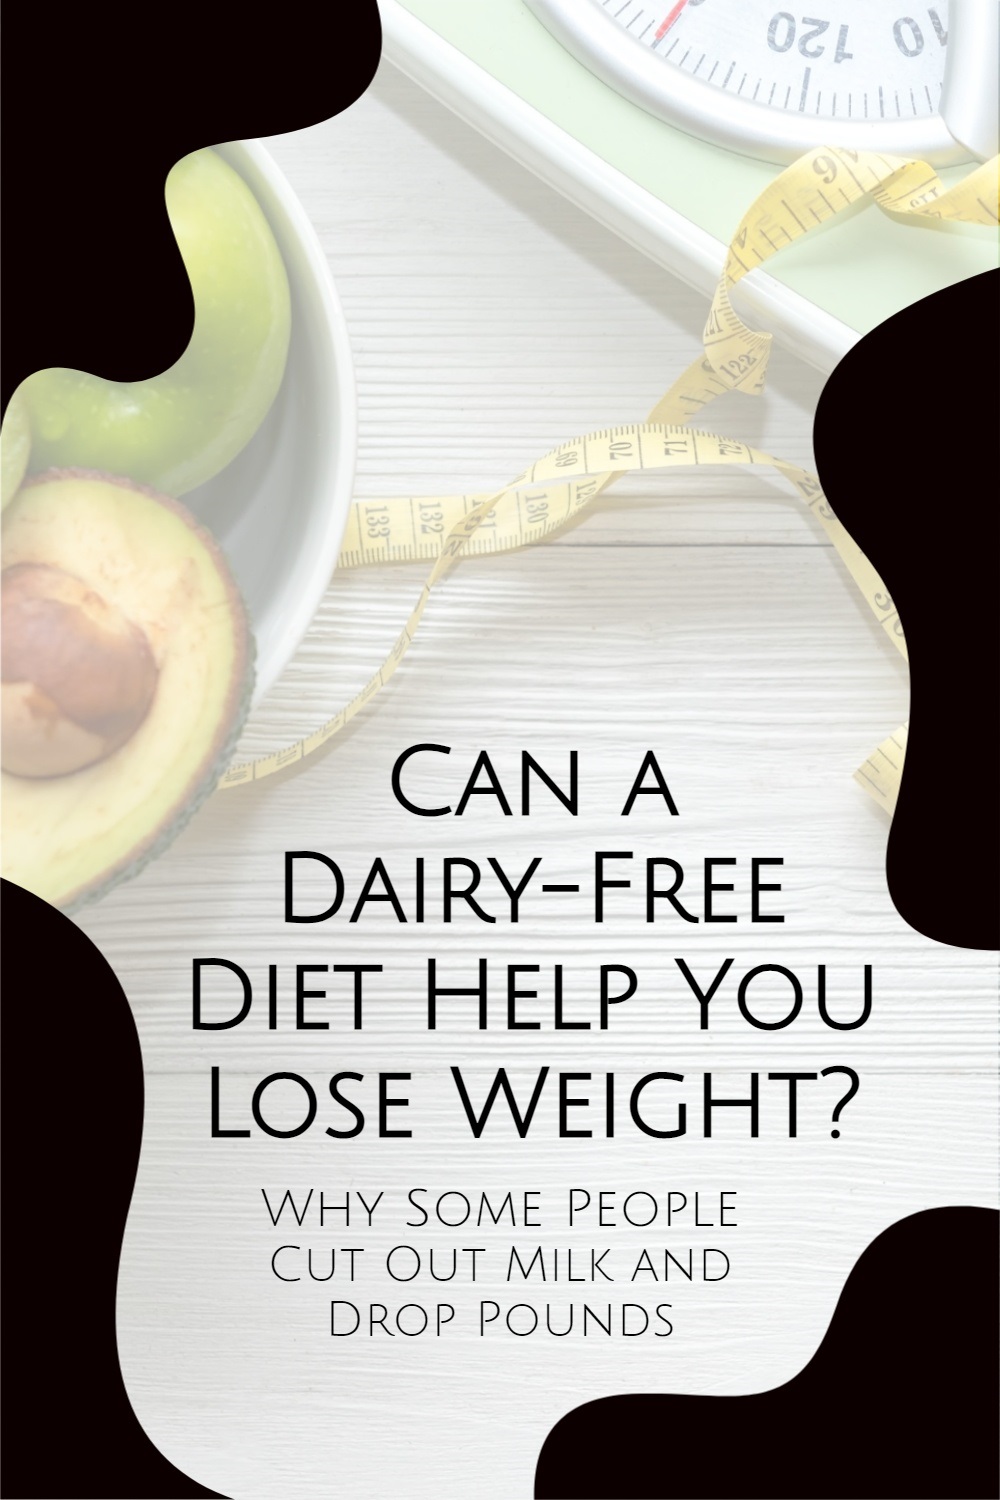 Can a Dairy-Free Diet Help You Lose Weight?